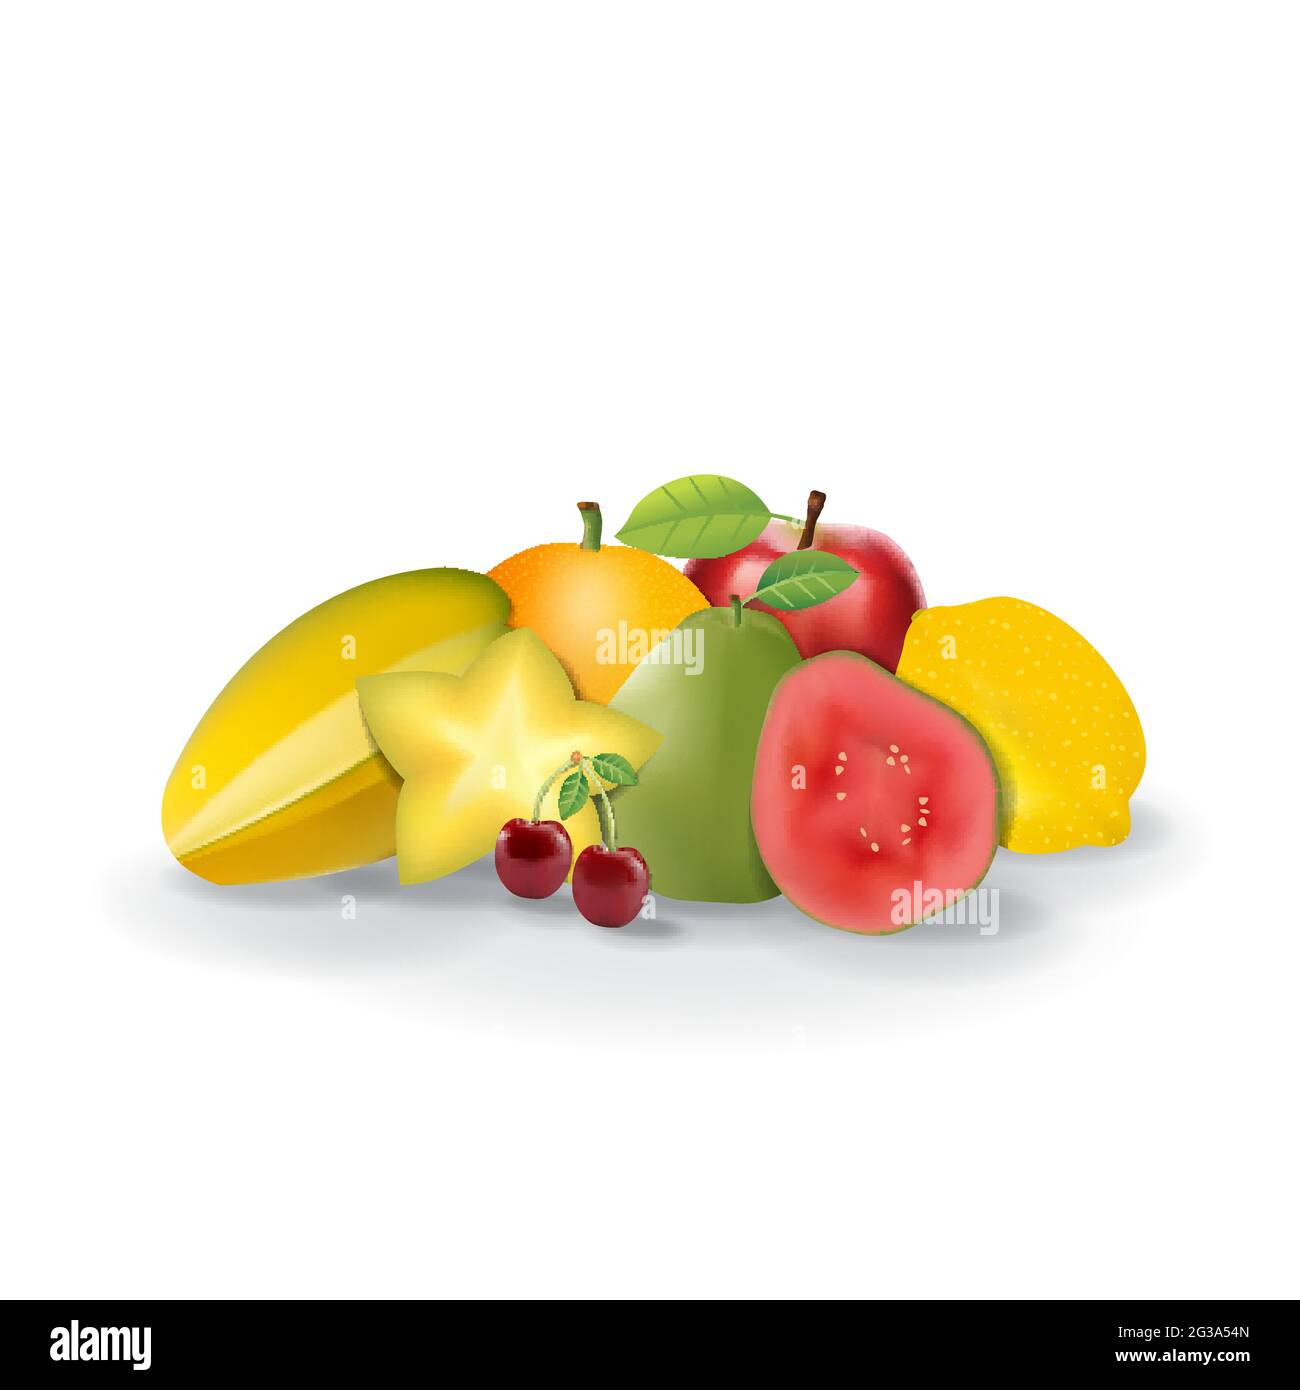 Realistic Natural Fresh Fruits on White Summer Isolated Vector Illustration 02 Stock Vector